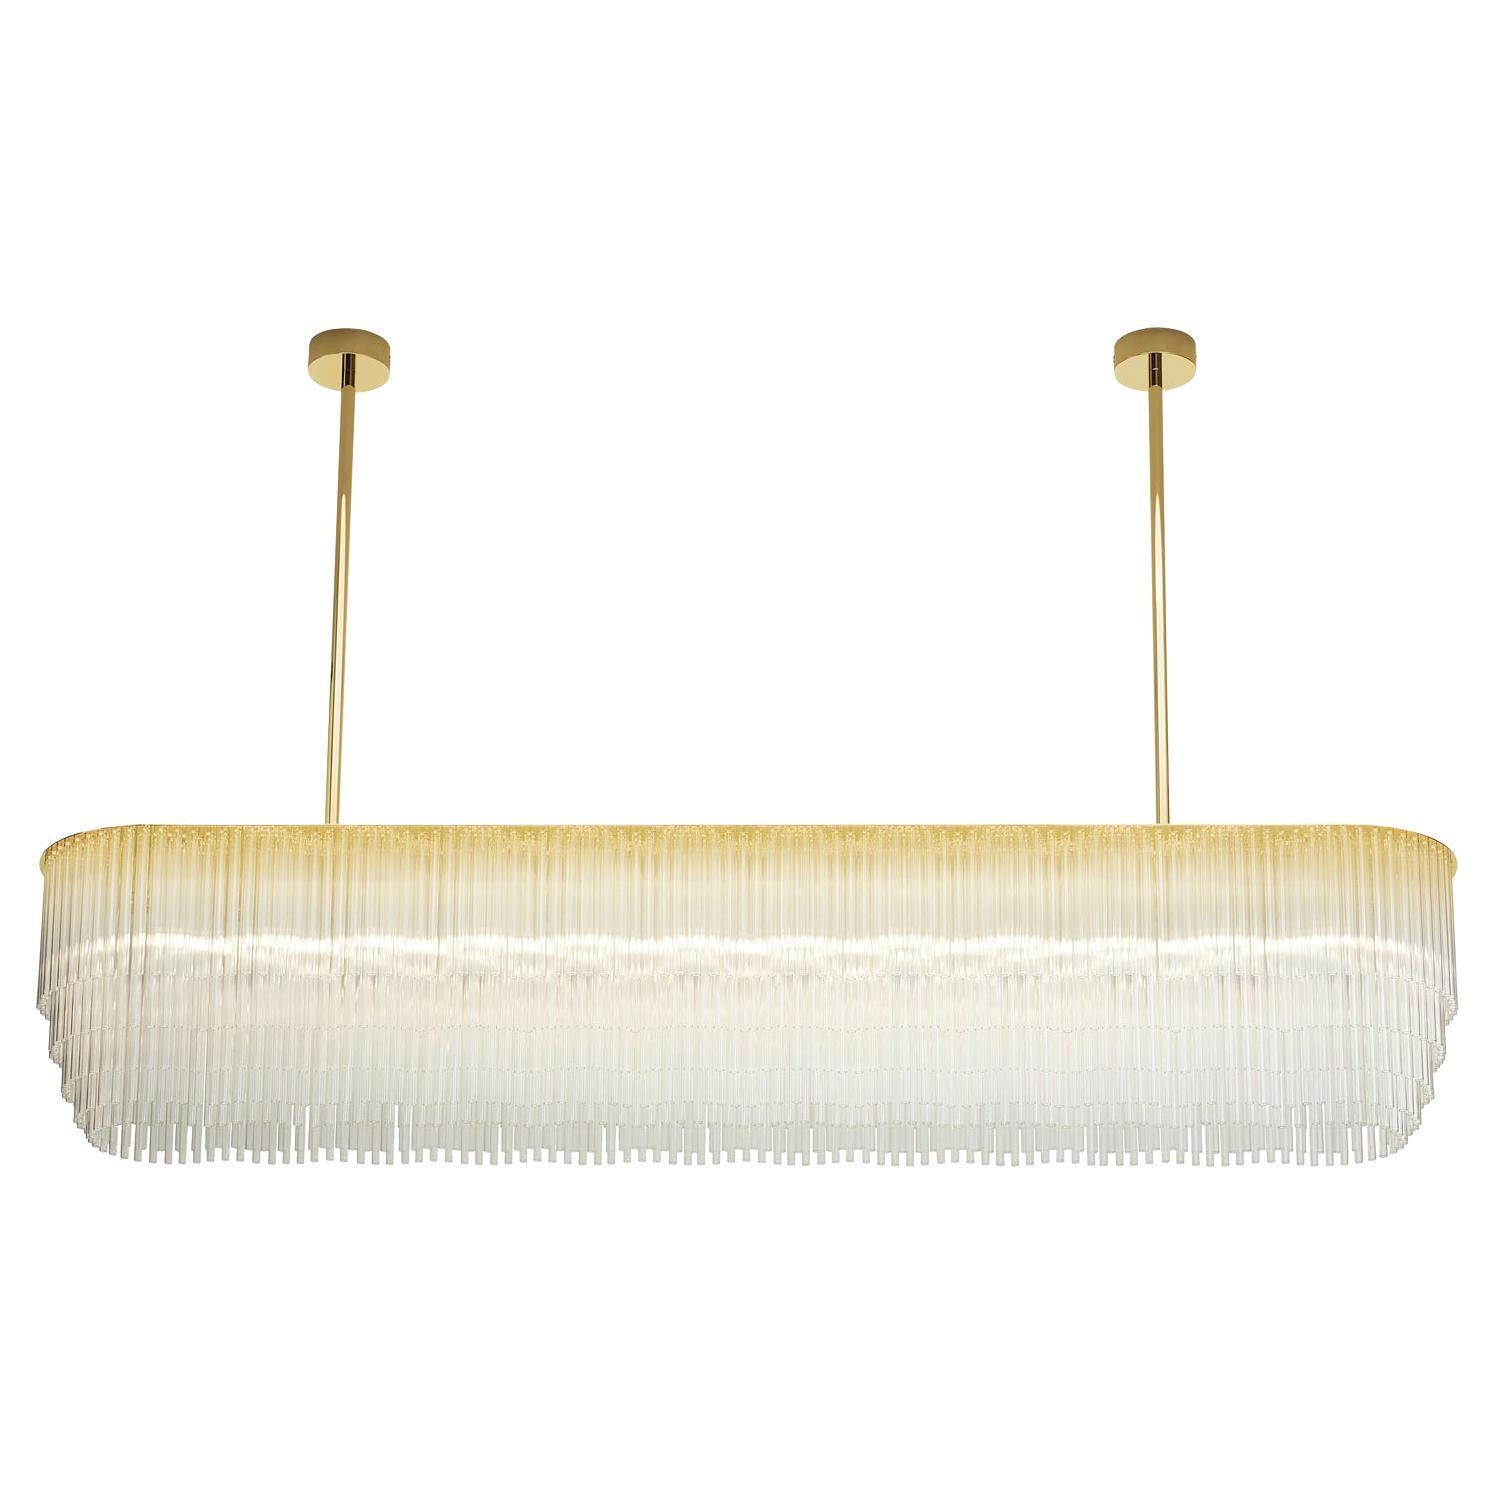 Linear Chandelier 1479mm / 58.25" in Polished Brass with Tiered Glass Profile